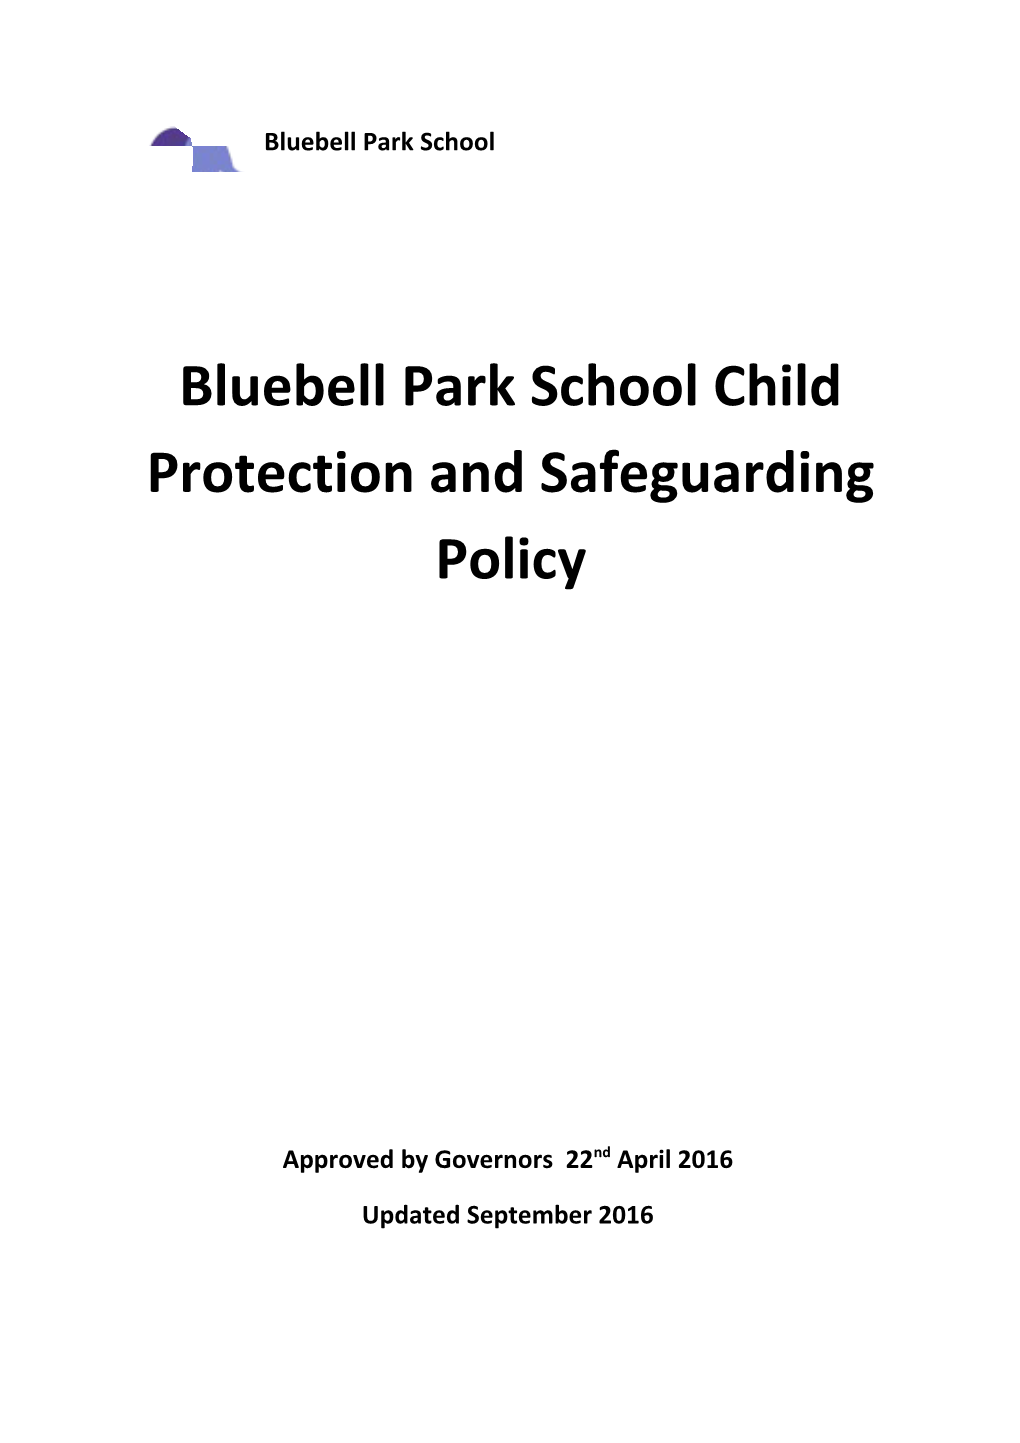 Bluebell Park School Child Protection and Safeguarding Policy